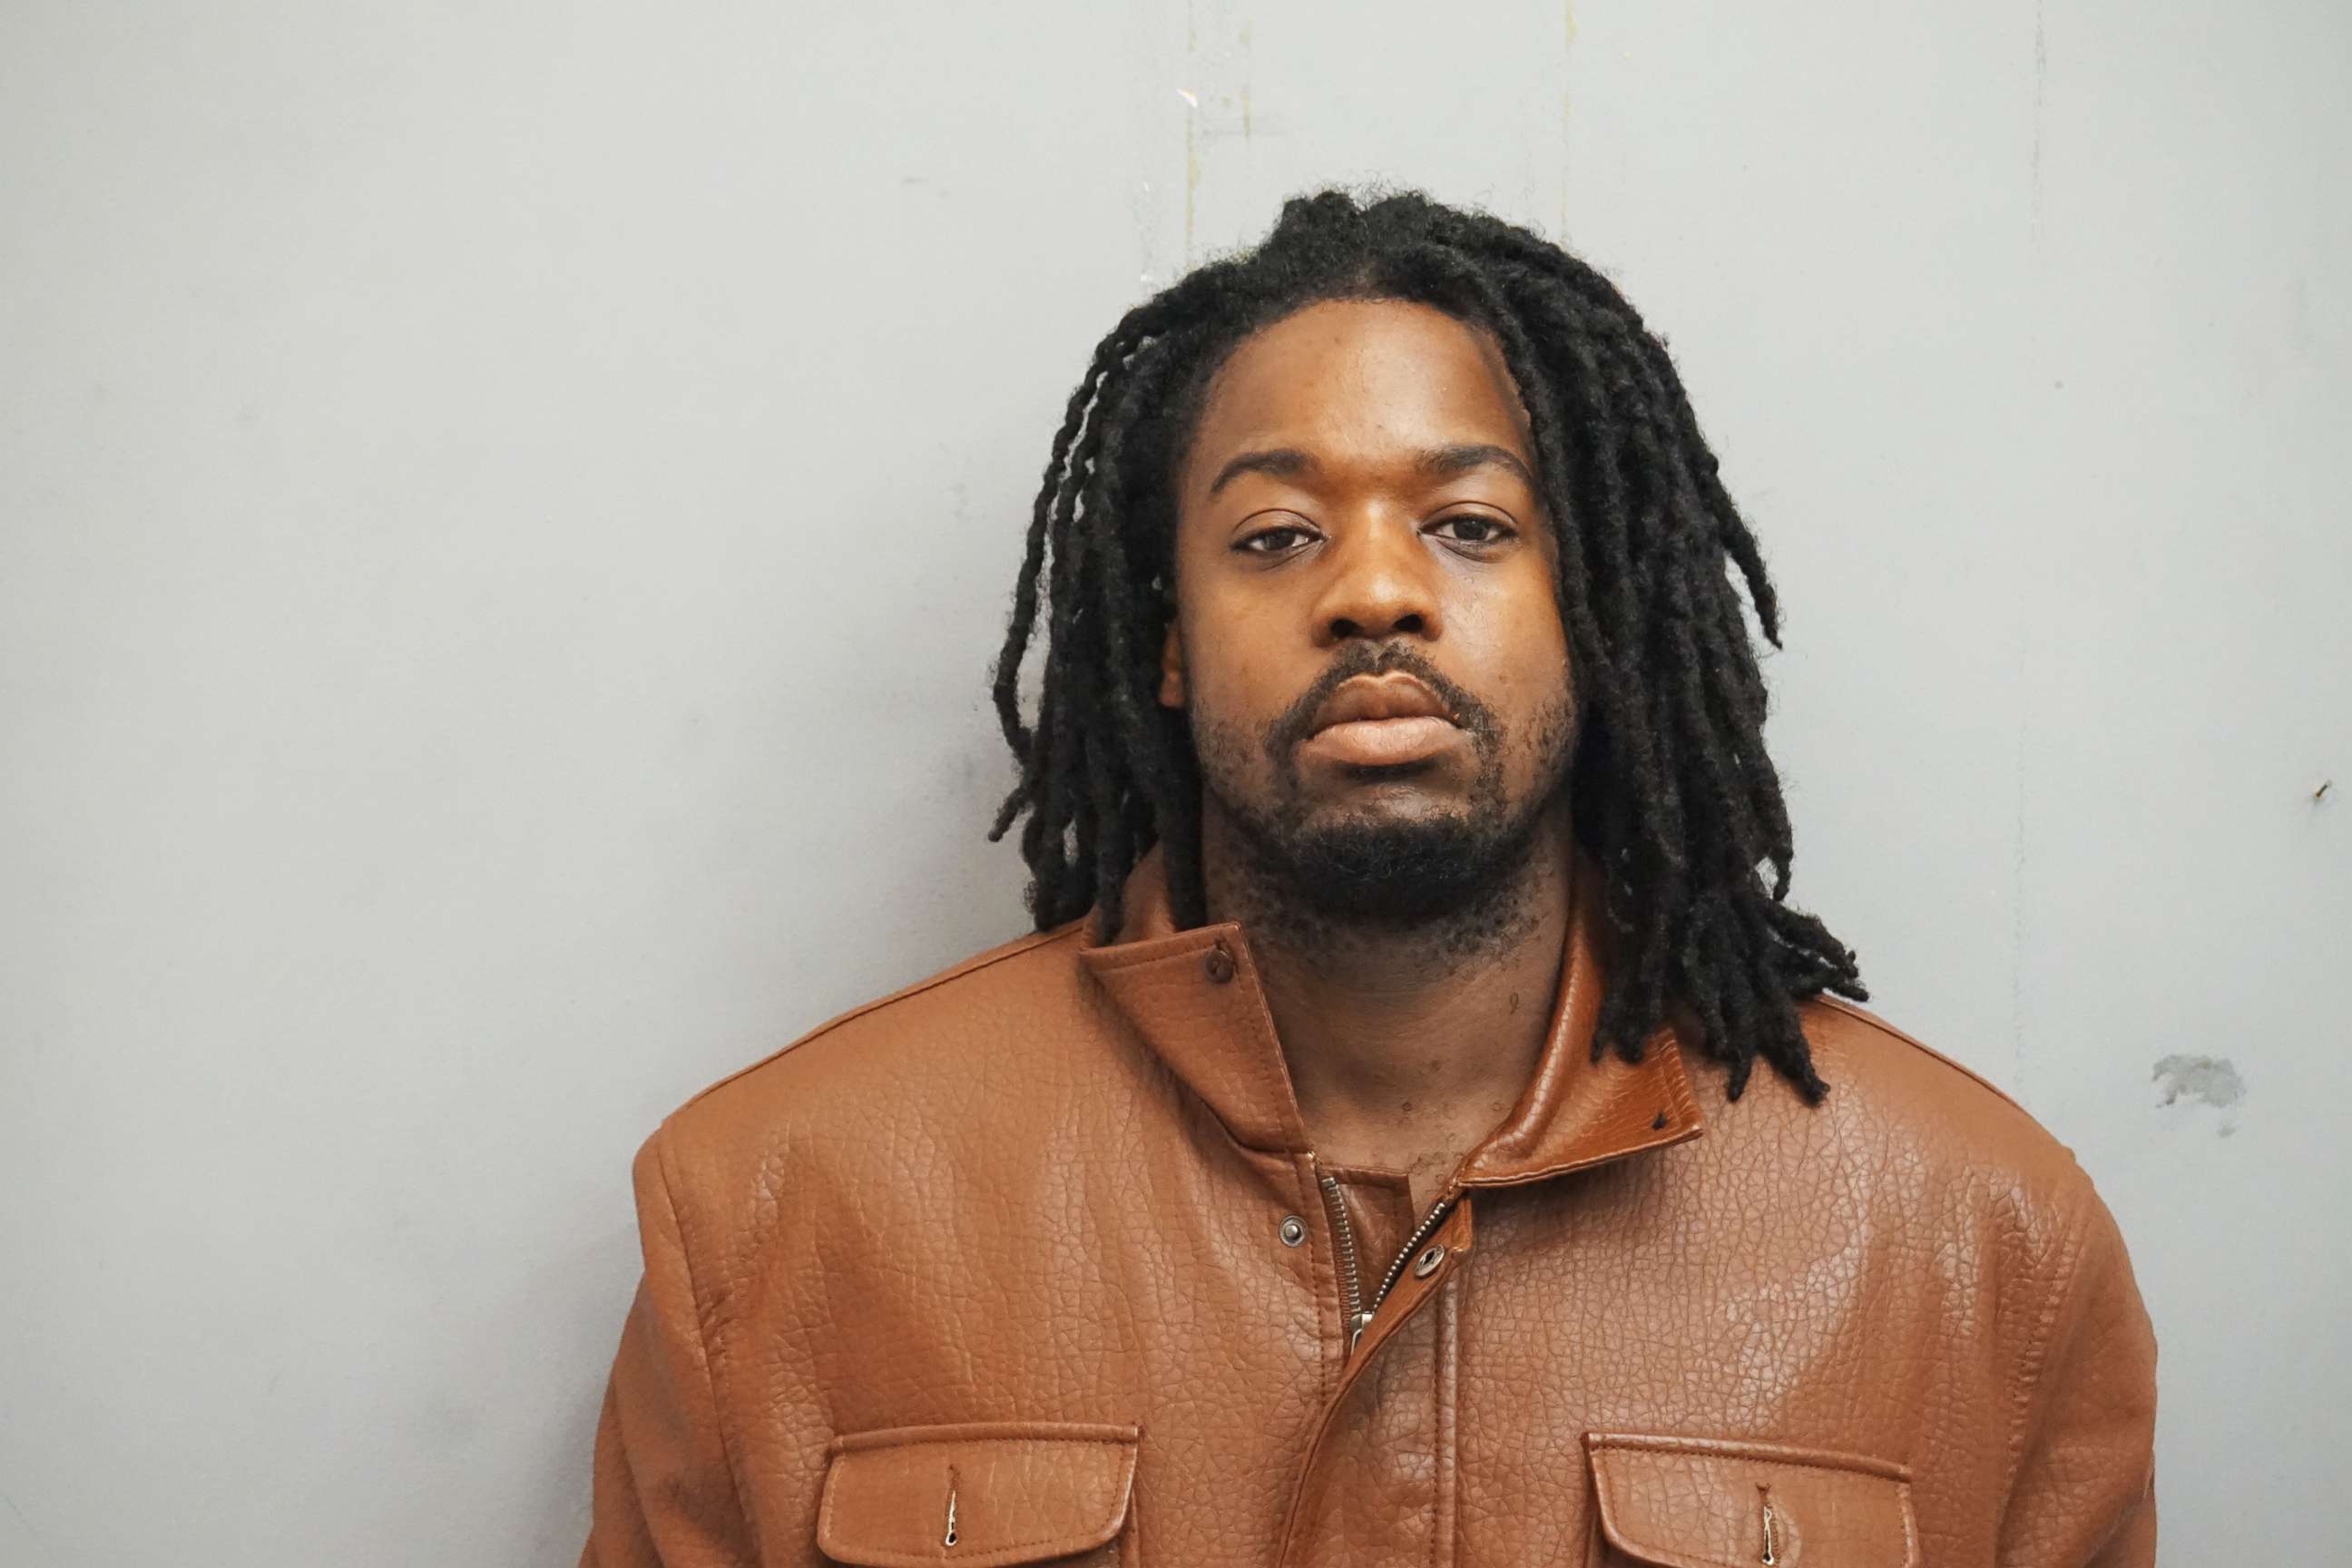 PHOTO: Donald Thurman, 26, is pictured in an undated photo released by the University of Illinois at Chicago Police Department with a press release on Nov. 25, 2019, stating that he has been charged for the murder of Ruth George.